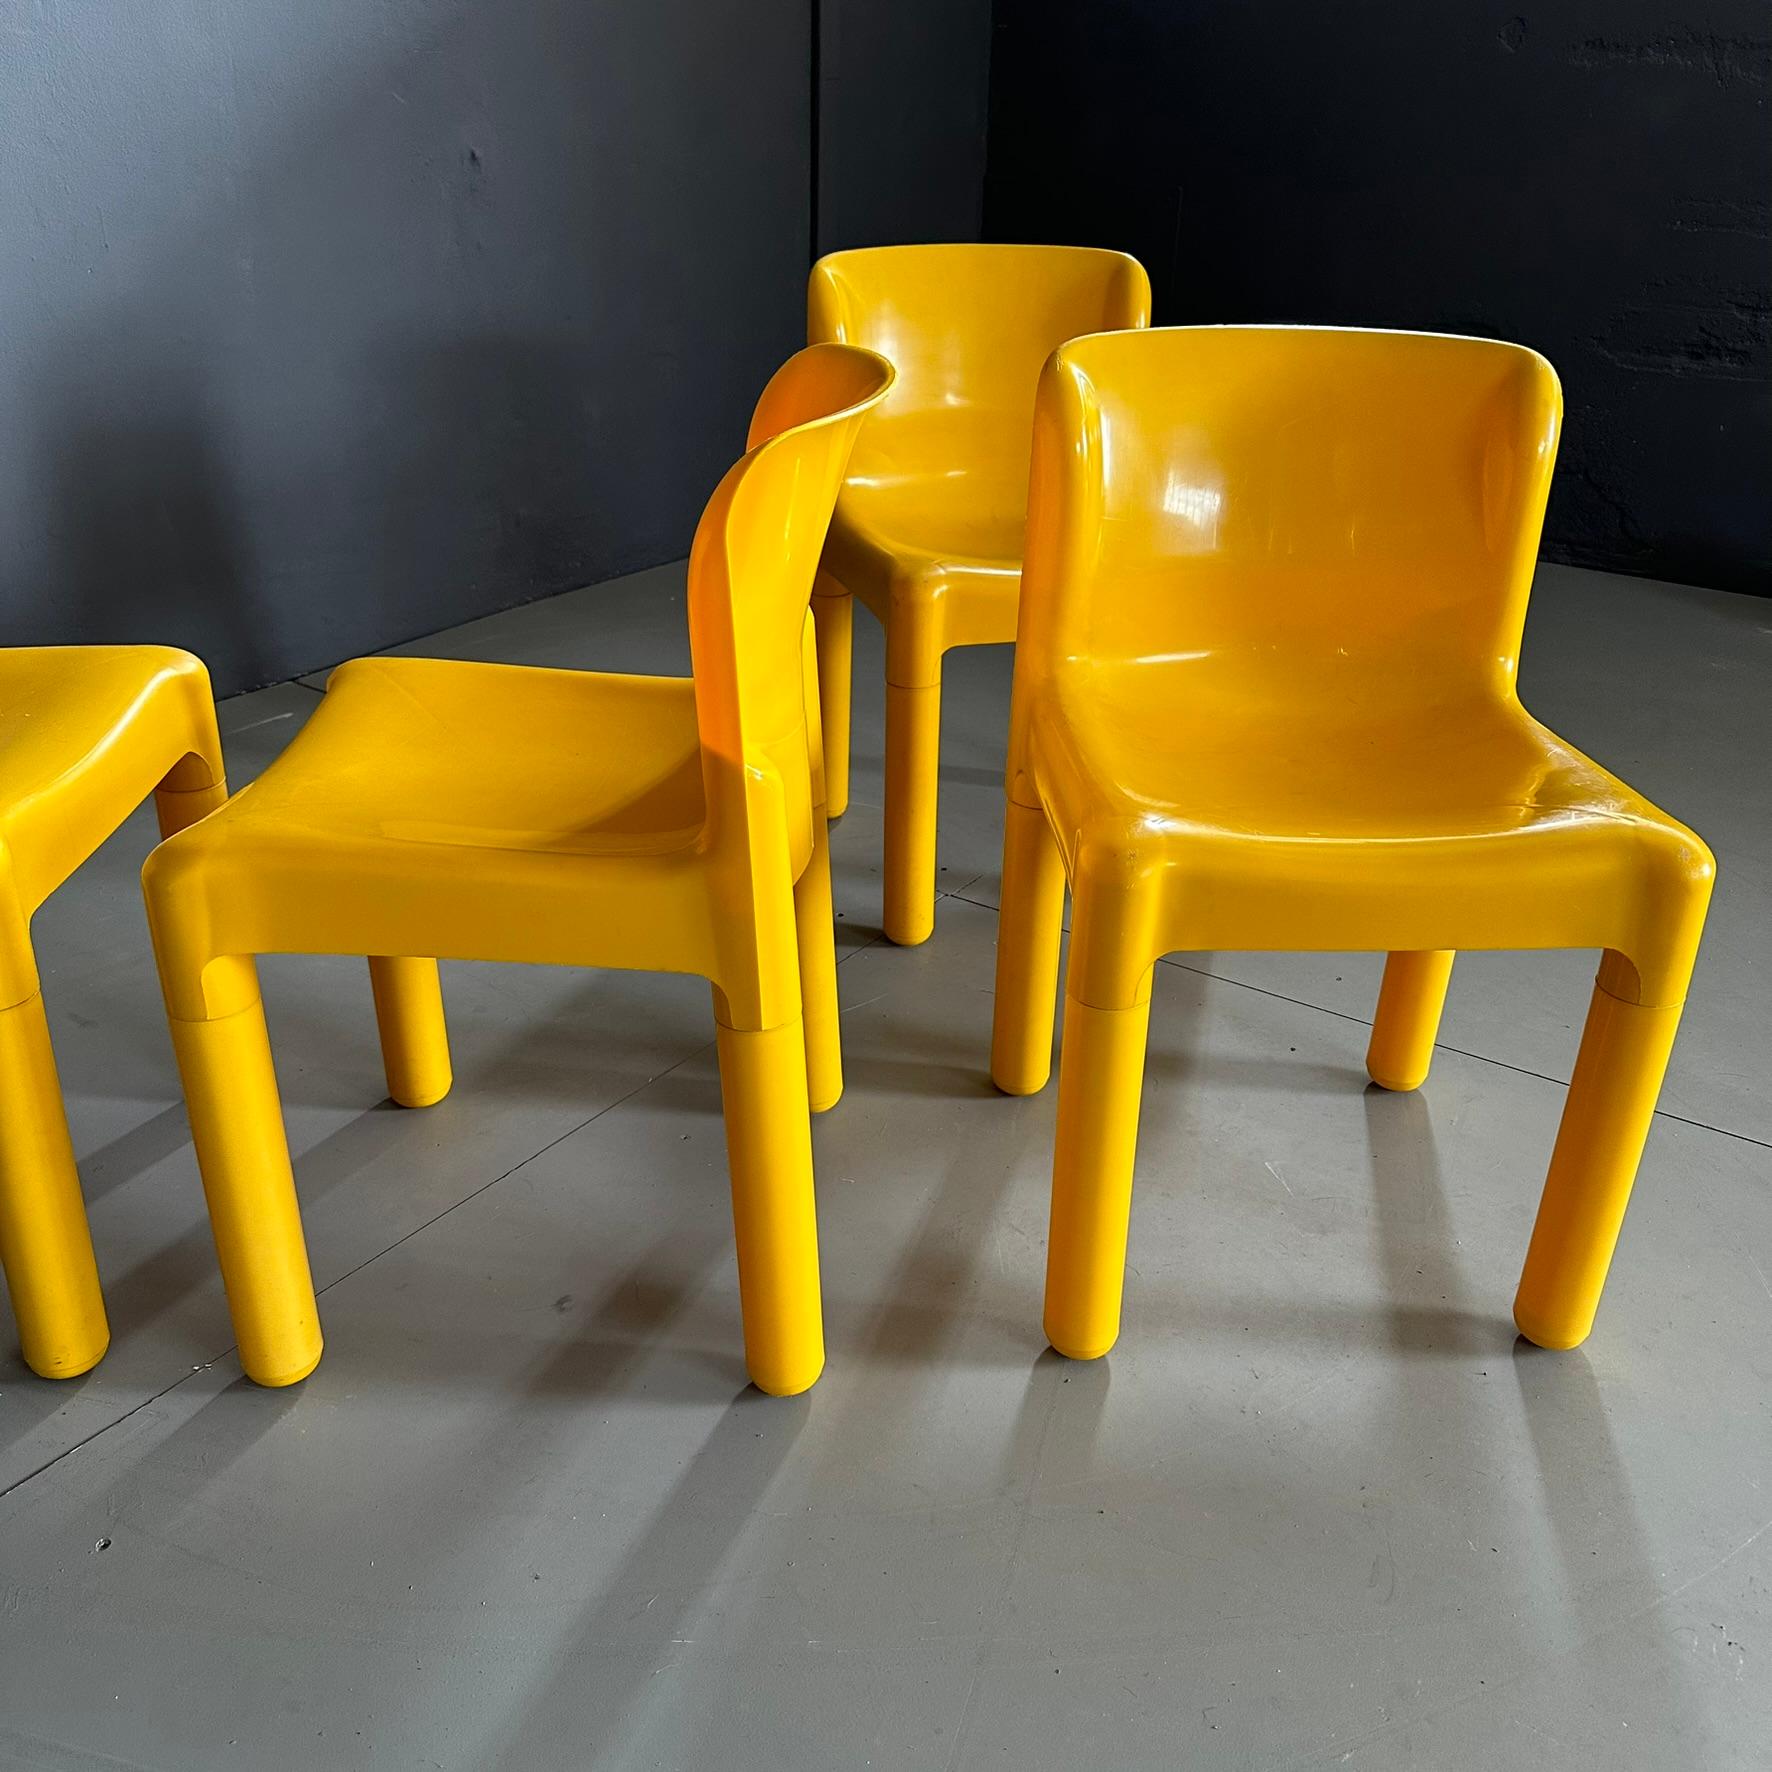 Late 20th Century Set of 5 yellow bright chairs mod. 4875 designed by Carlo Bartoli for Kartell 